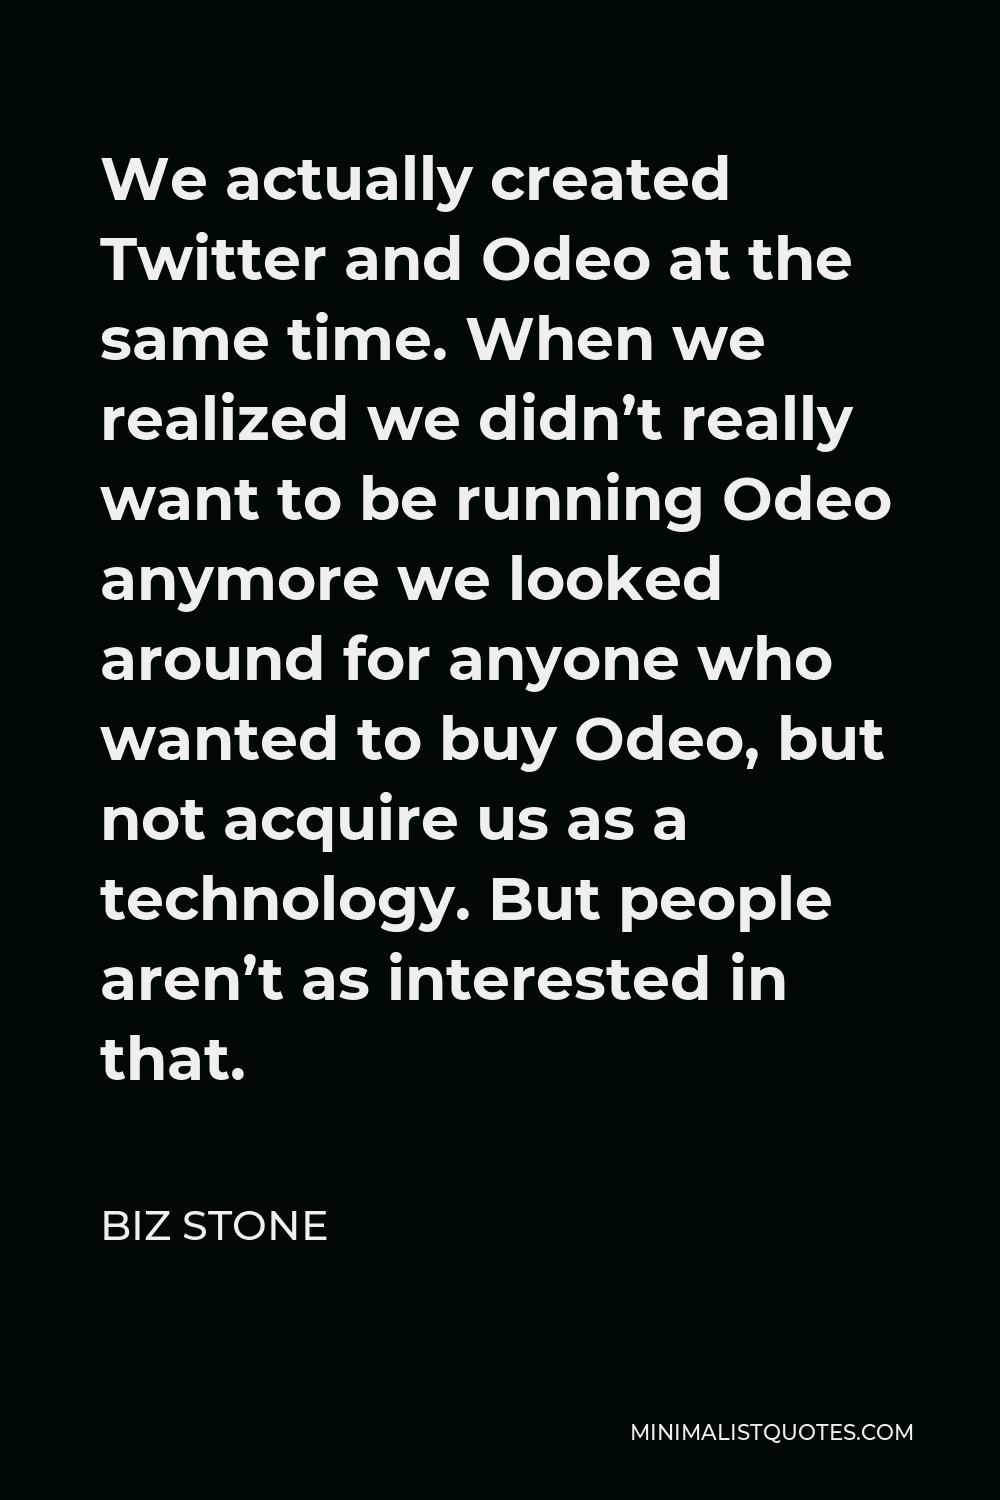 Biz Stone Quote - We actually created Twitter and Odeo at the same time. When we realized we didn’t really want to be running Odeo anymore we looked around for anyone who wanted to buy Odeo, but not acquire us as a technology. But people aren’t as interested in that.